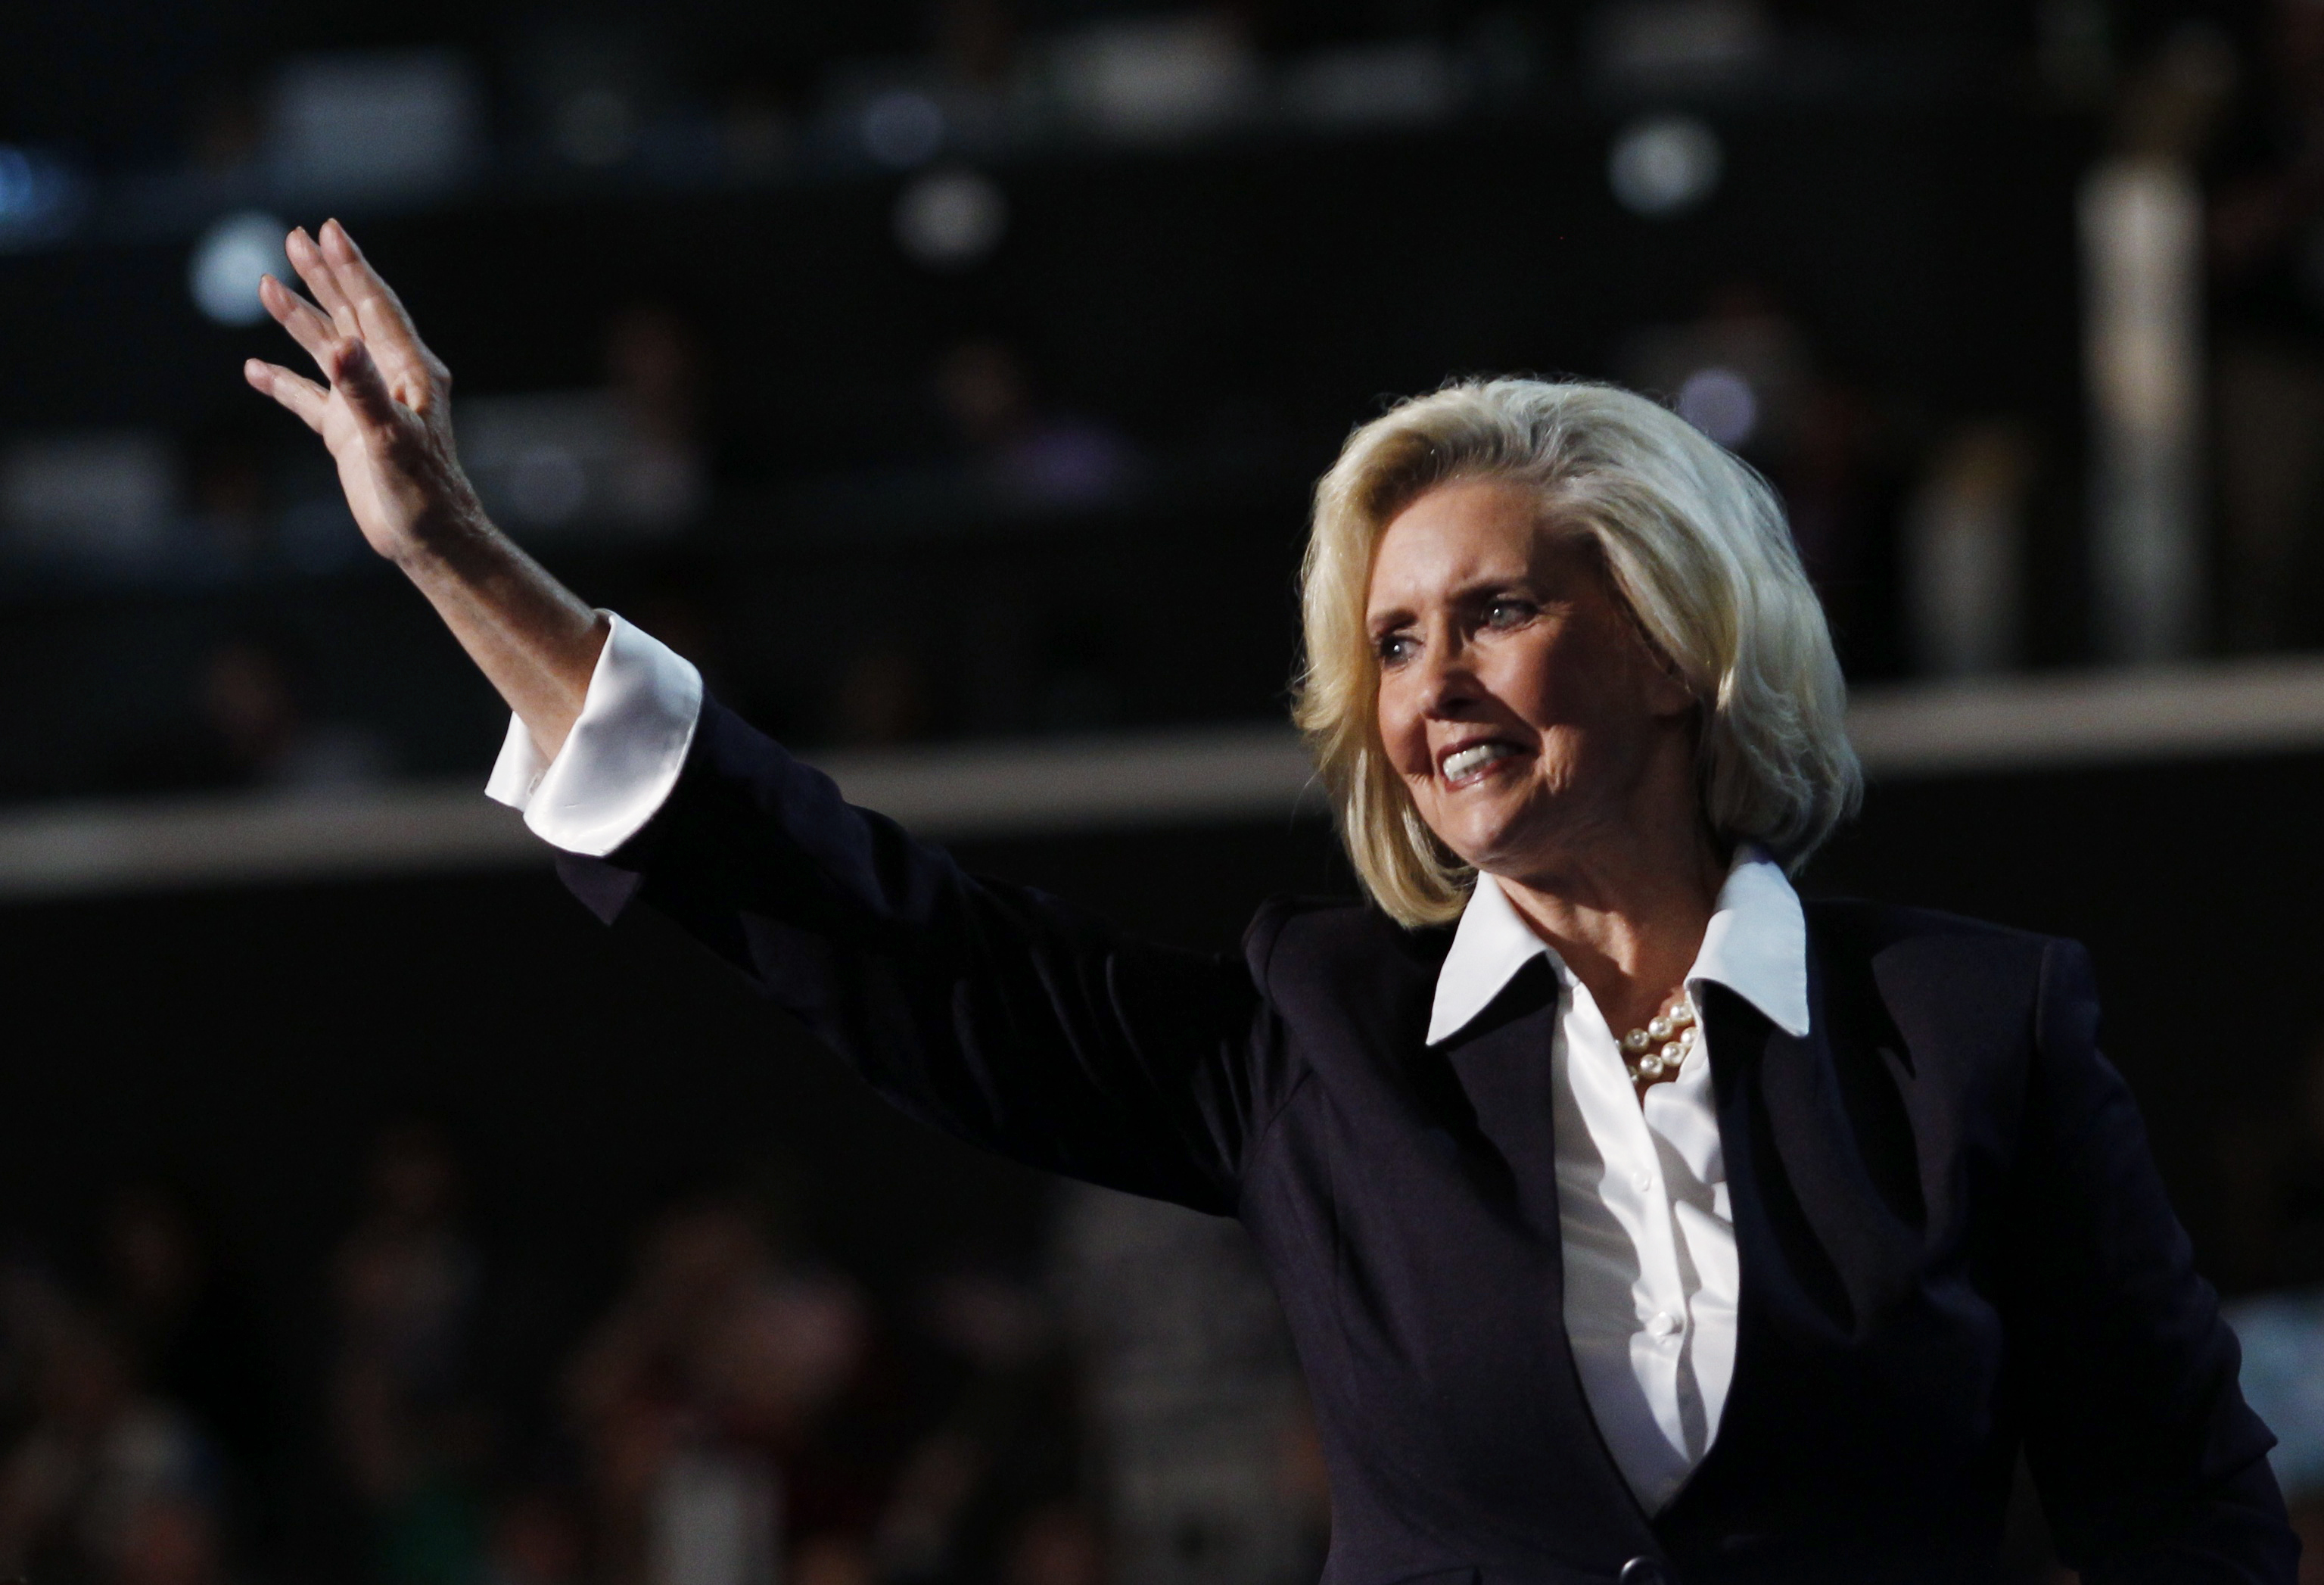 Women's rights leader Lilly Ledbetter, namesake of the Lilly Ledbetter Fair Pay Act, addresses the first session of the Democratic National Convention in Charlotte, N.C., on Sept. 4, 2012. 